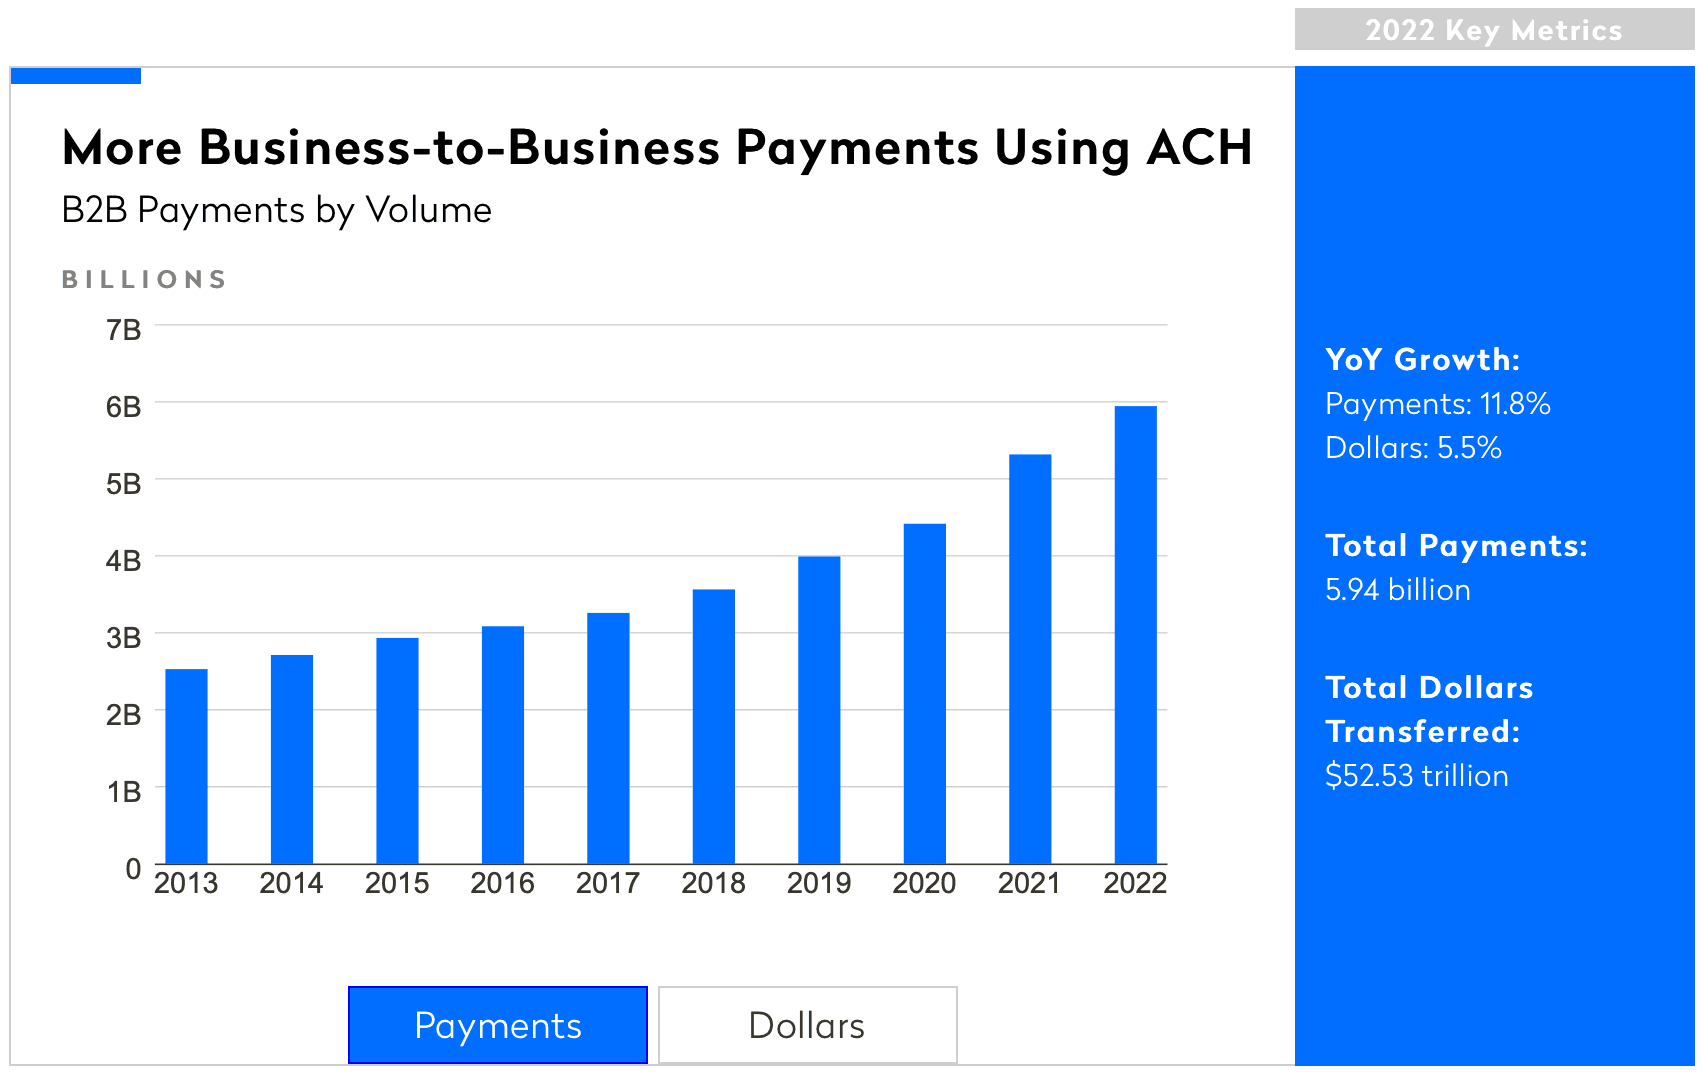 B2B payments using ACH